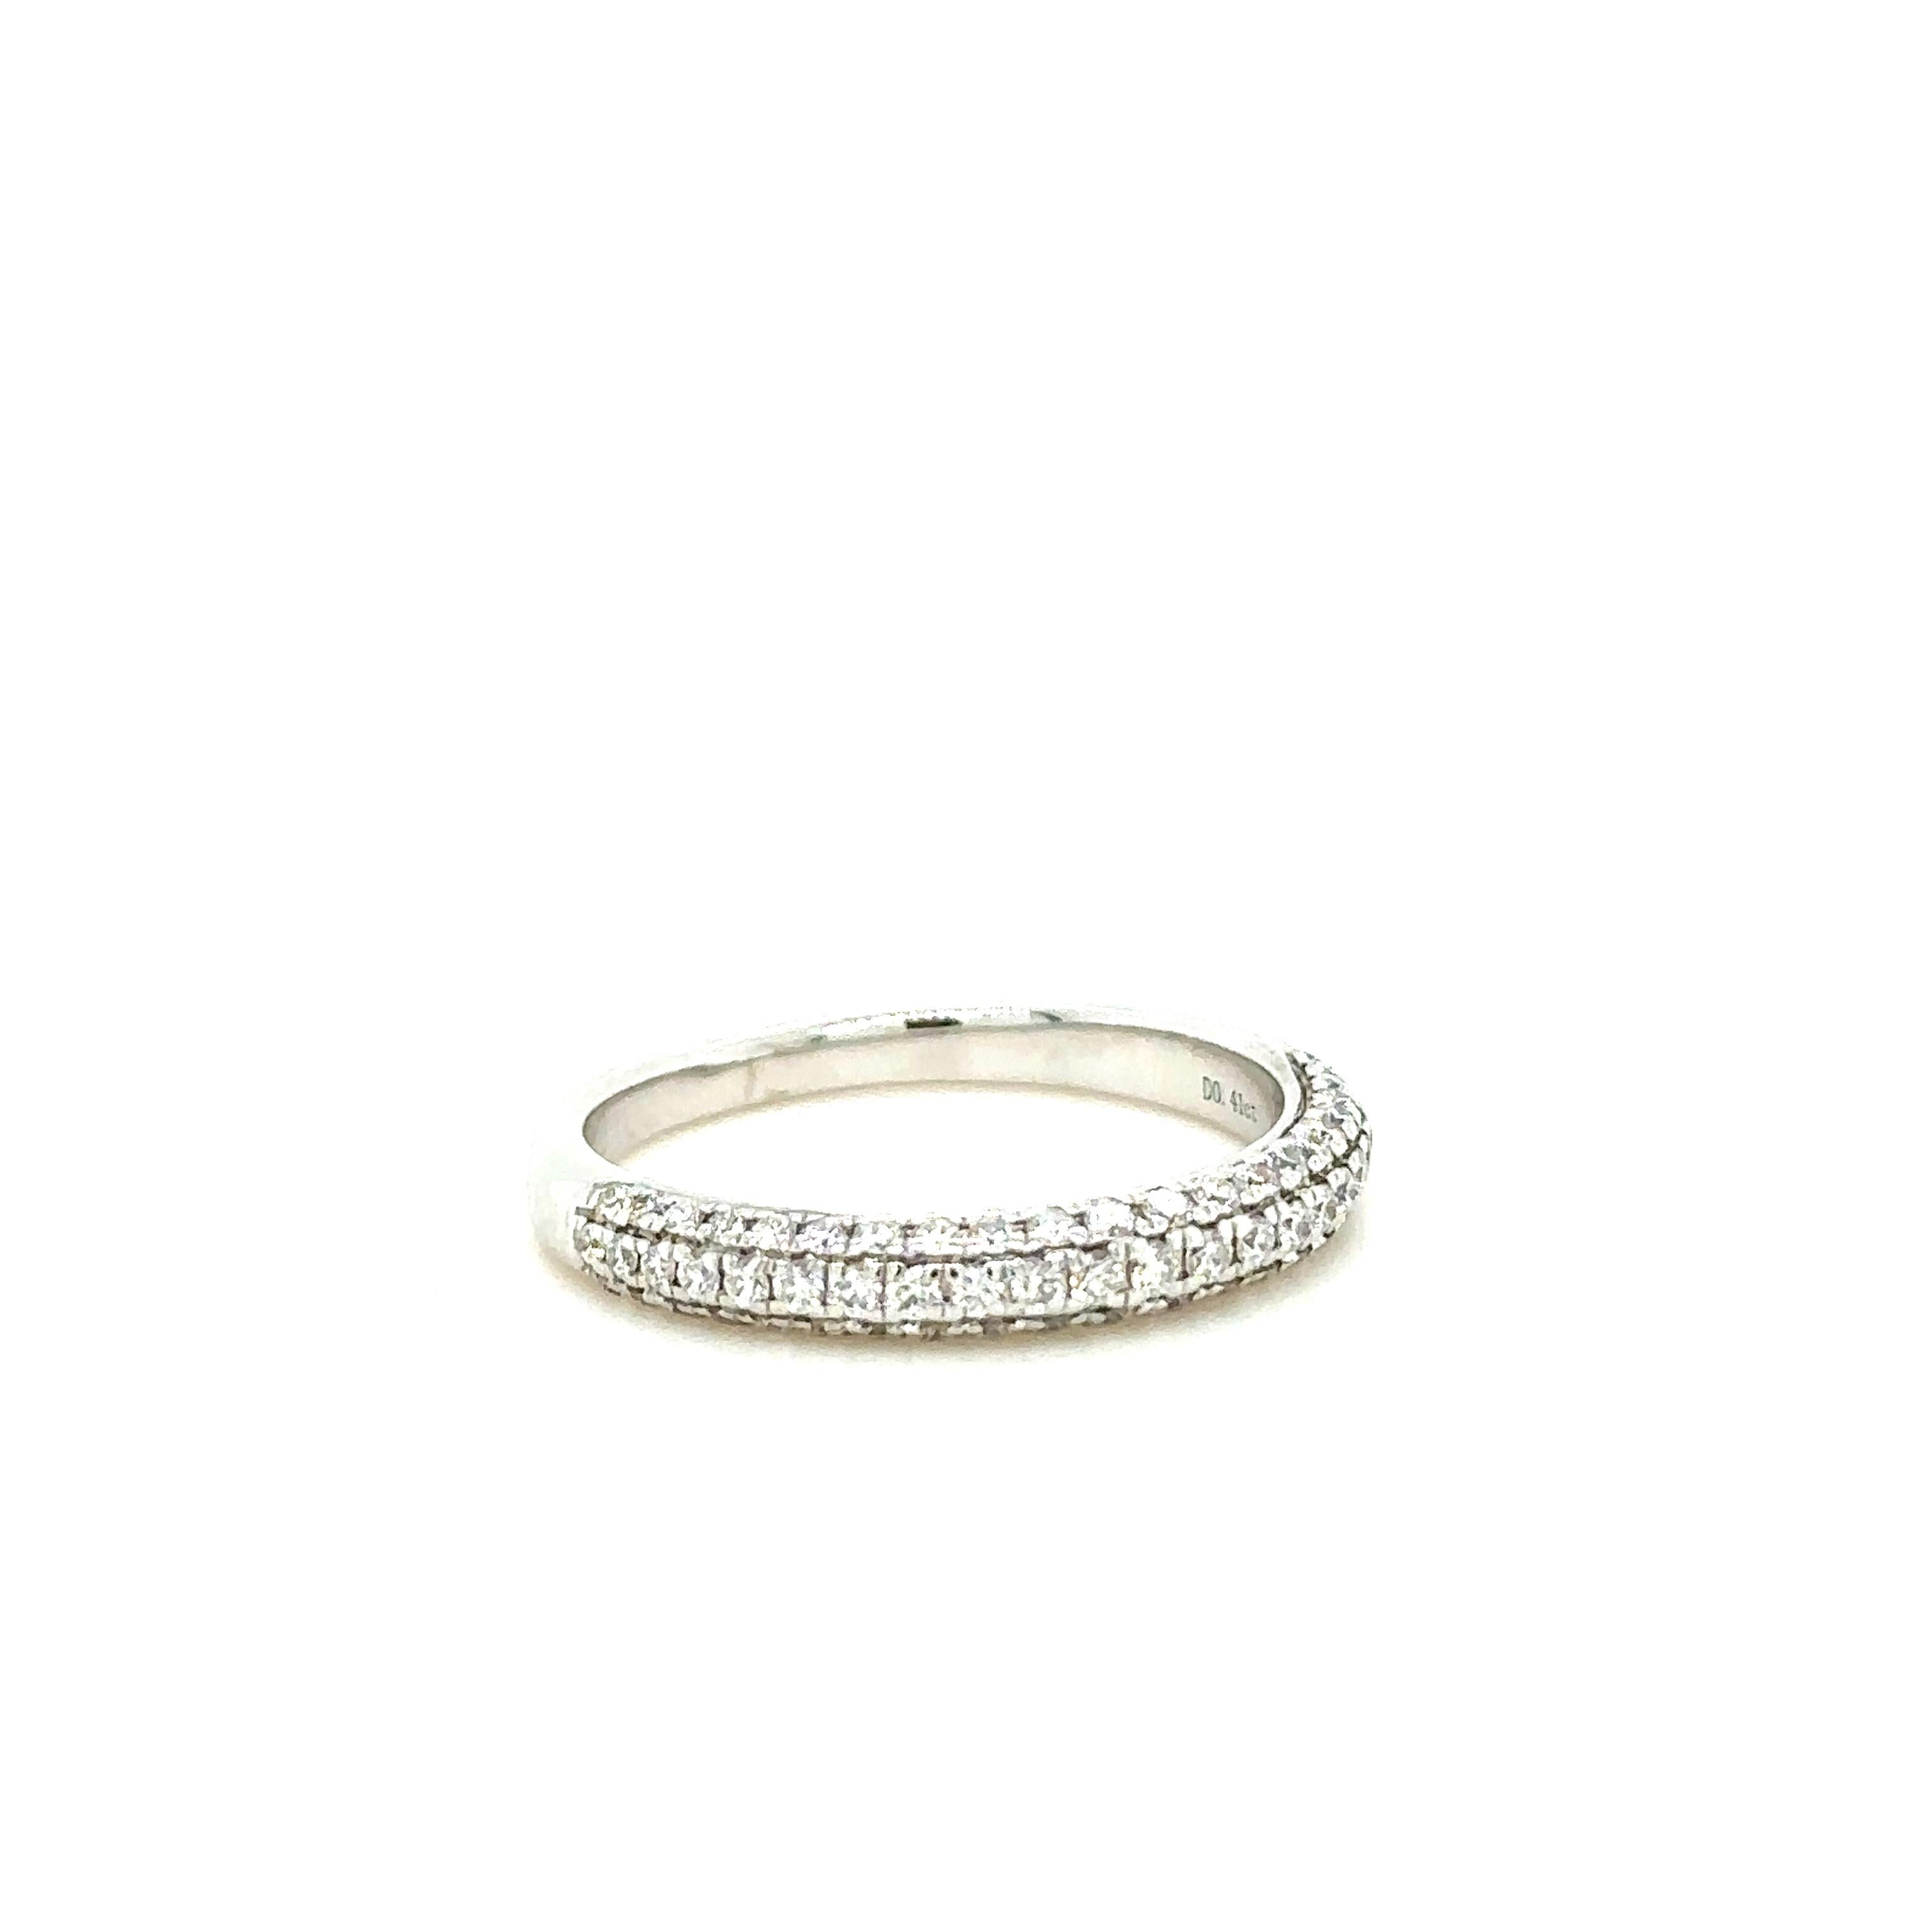 Unique features:

Diamond half eternity band. Made of 18 kt White Gold, in a pave setting, and weighing 2.9gm. Stamped: 18K 750.

Set with 67 round, brilliant cut Diamonds, colour F-G and clarity VS-SI. with a total weight of 0.41ct.

Metal: 18ct